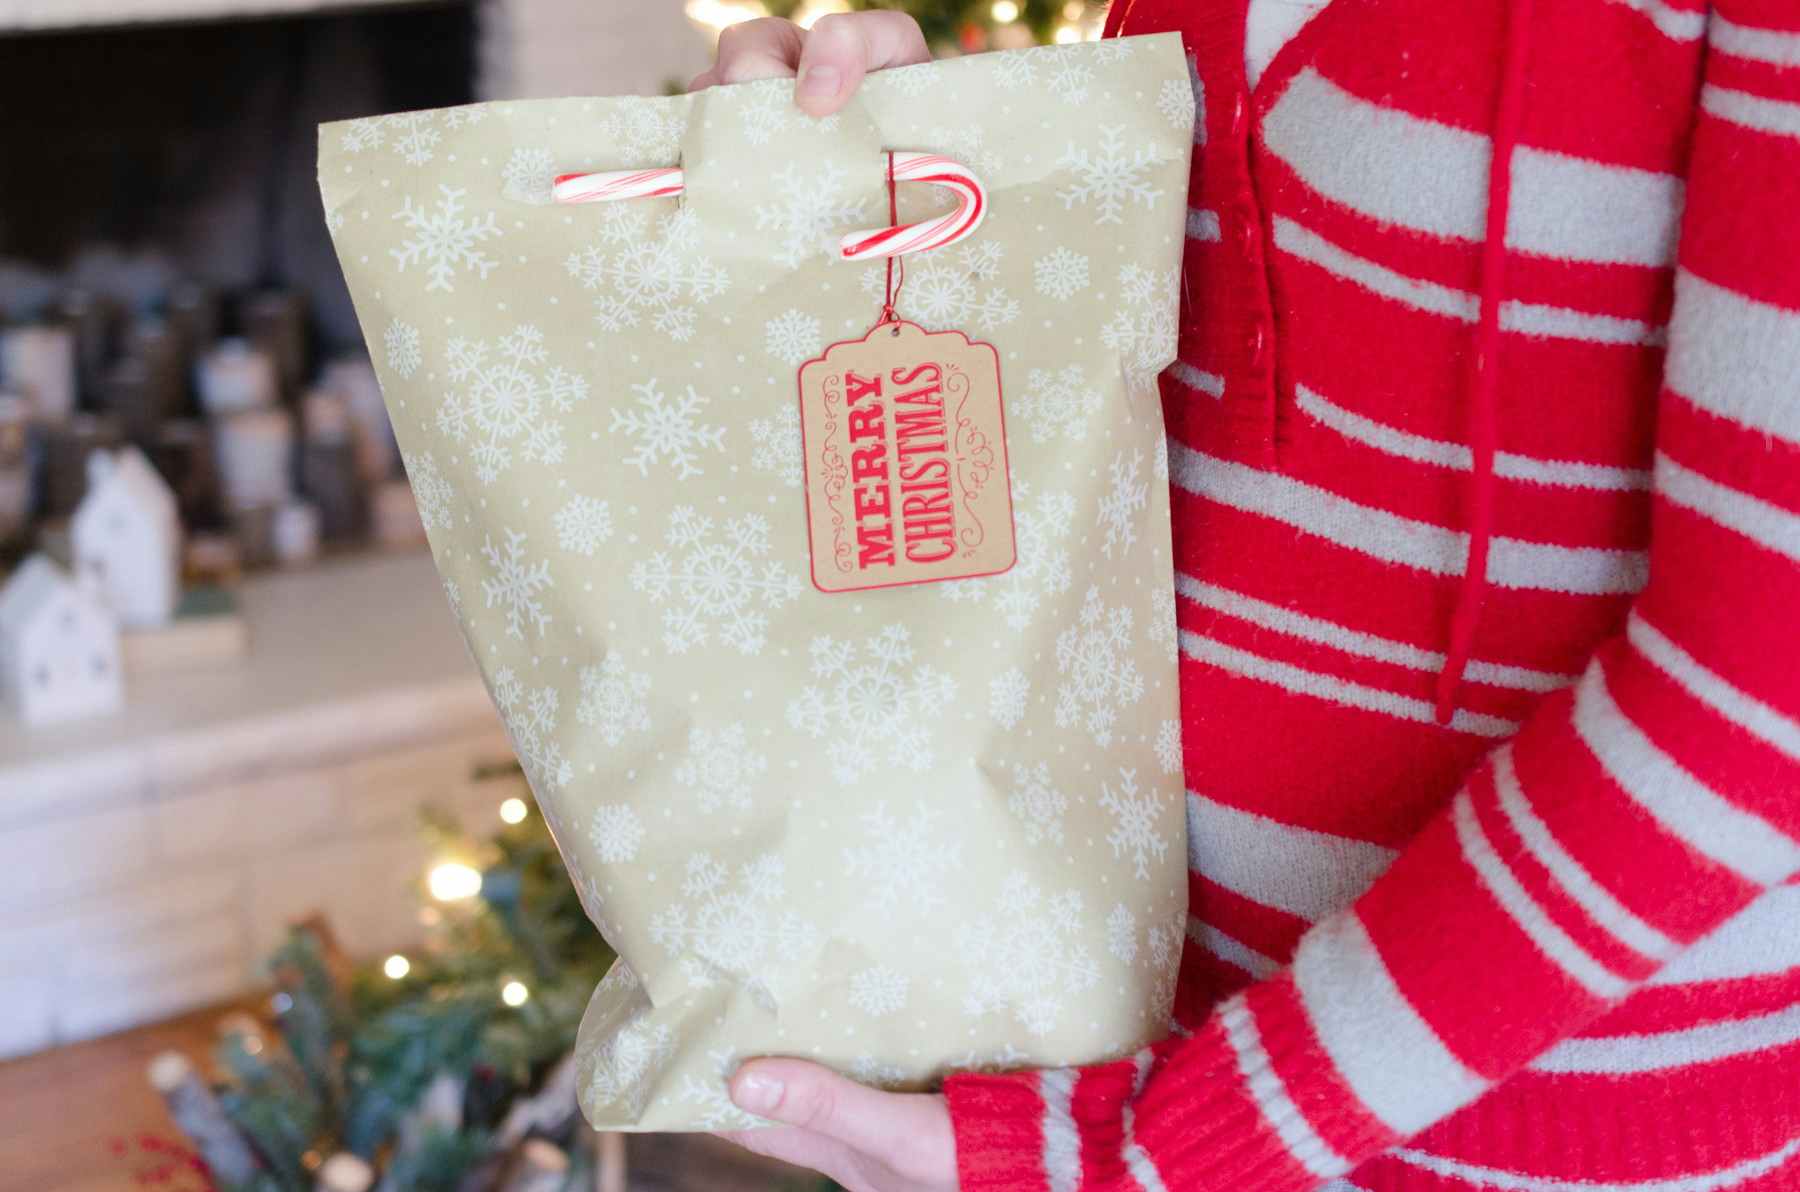 A gift bag made from wrapping paper, secured with a candy cane.